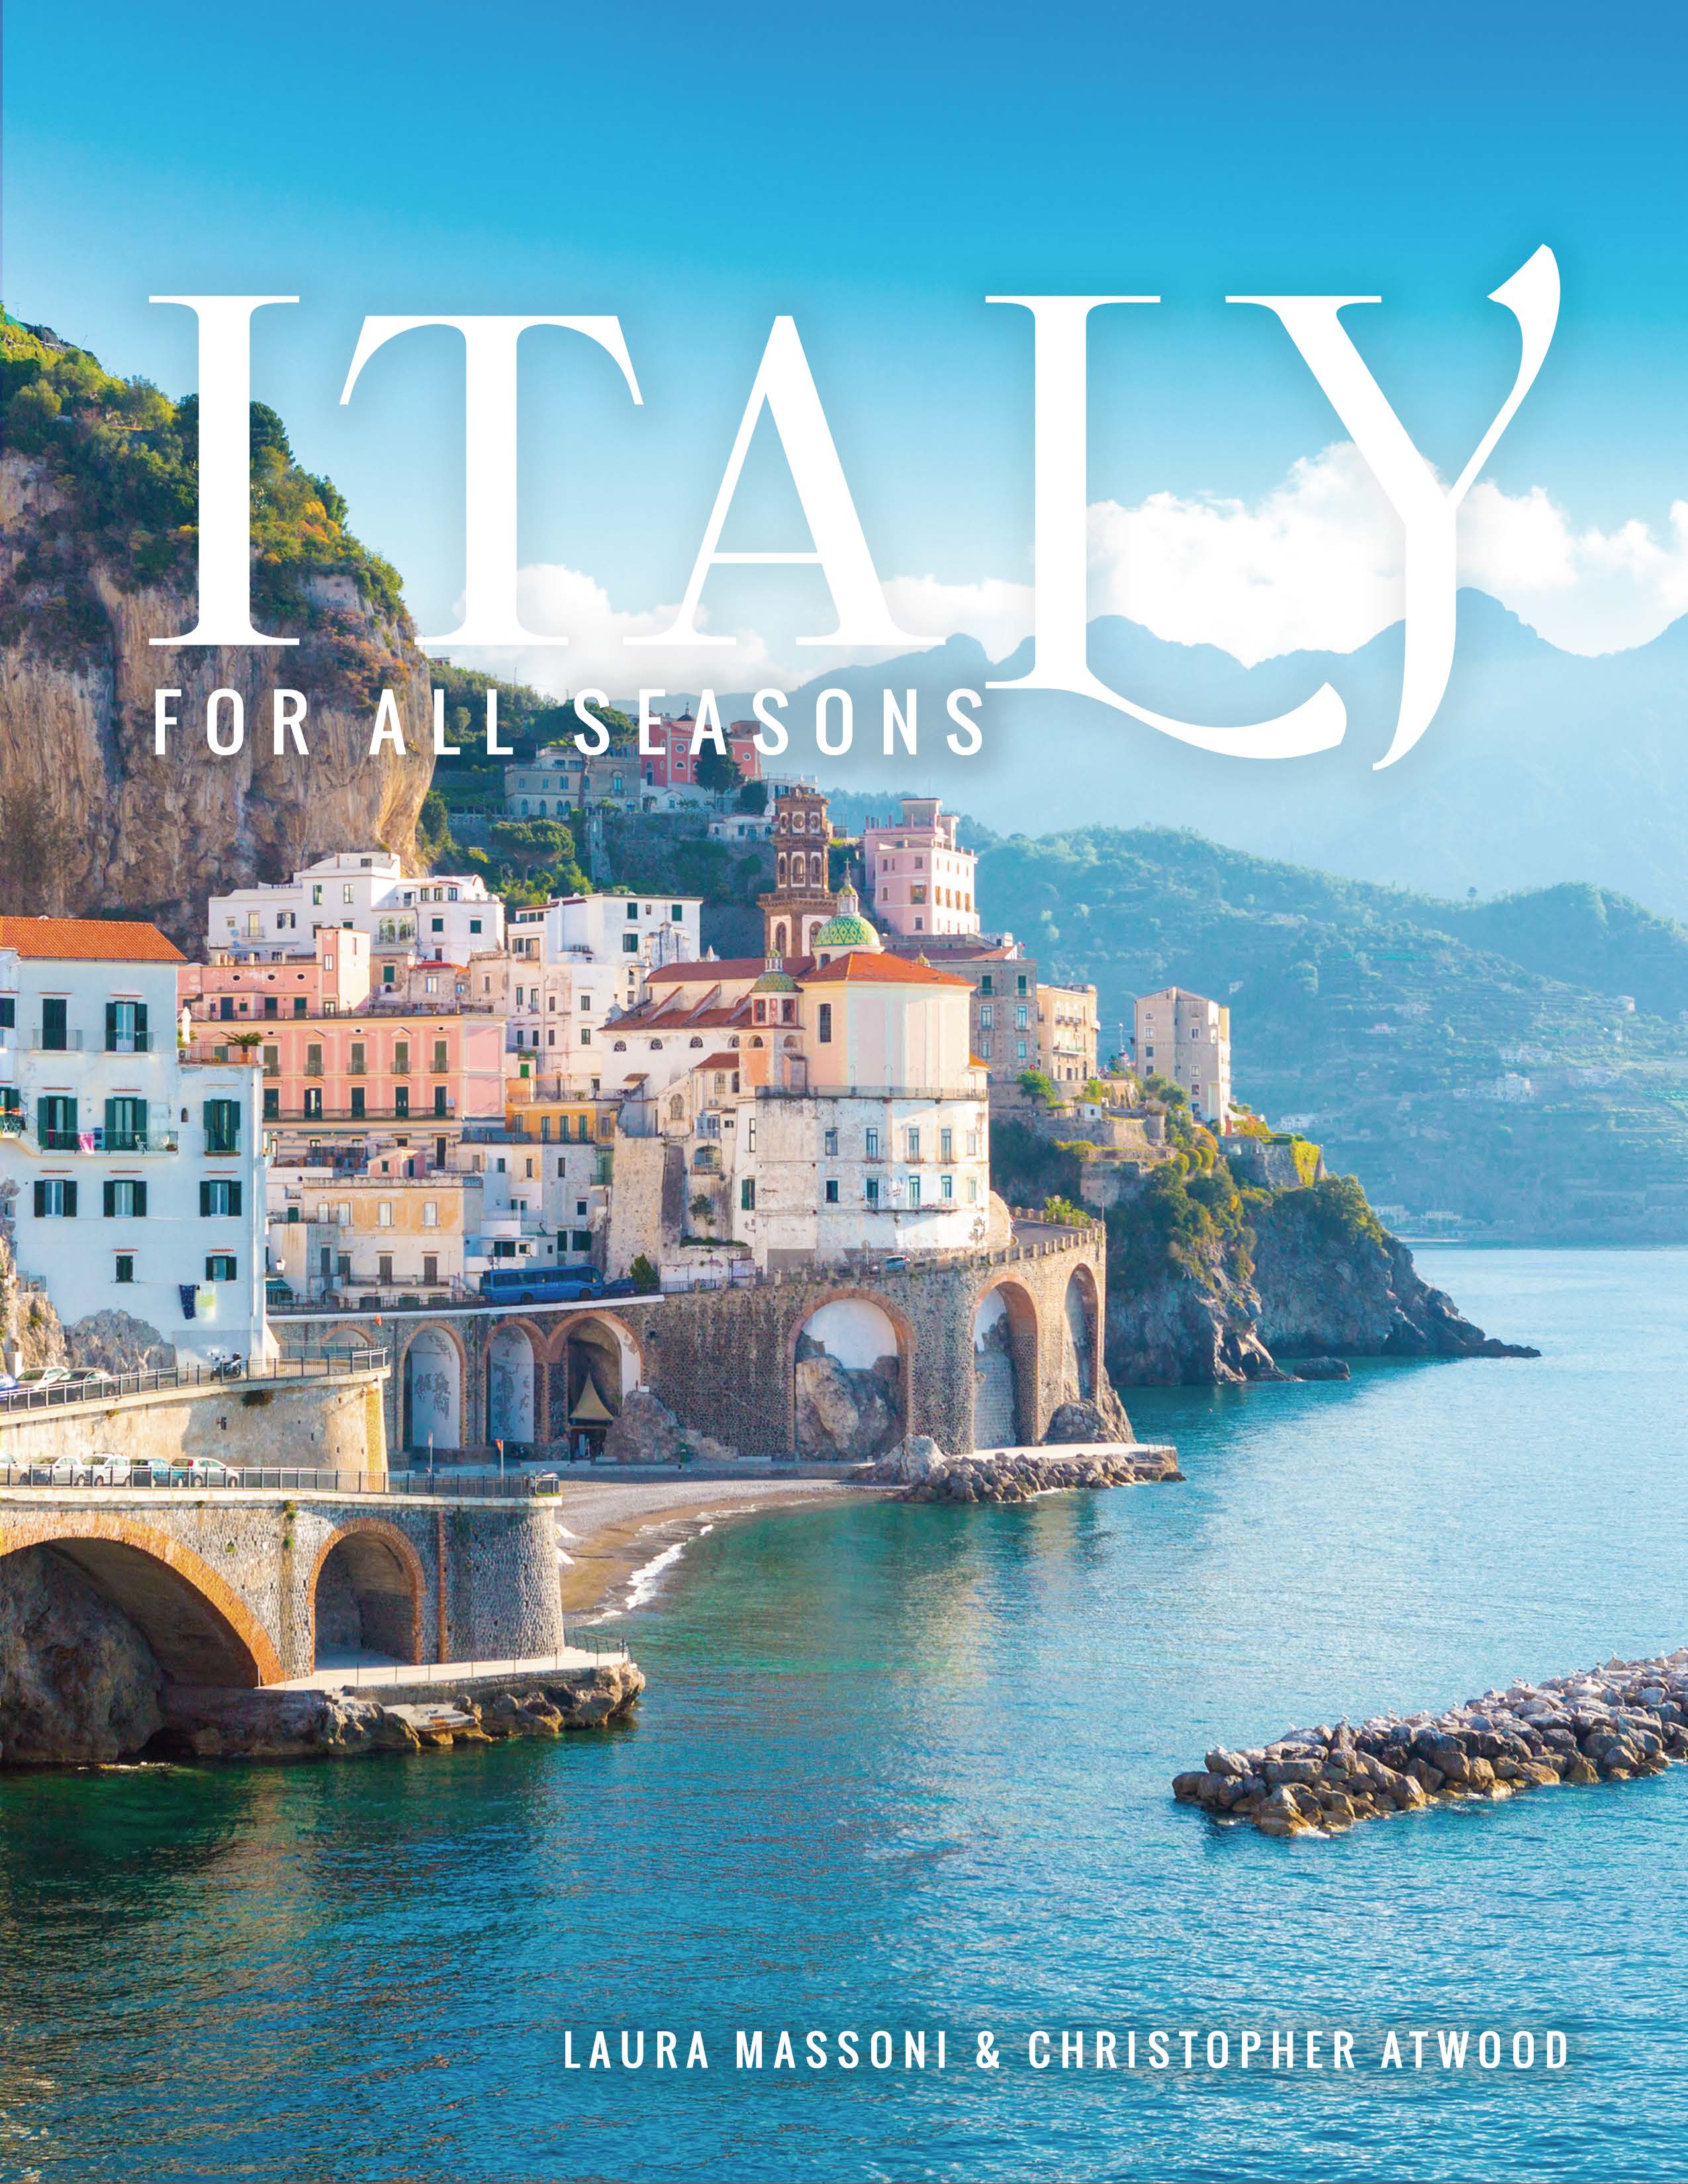 Download Our Free Guide to Italy in Summer